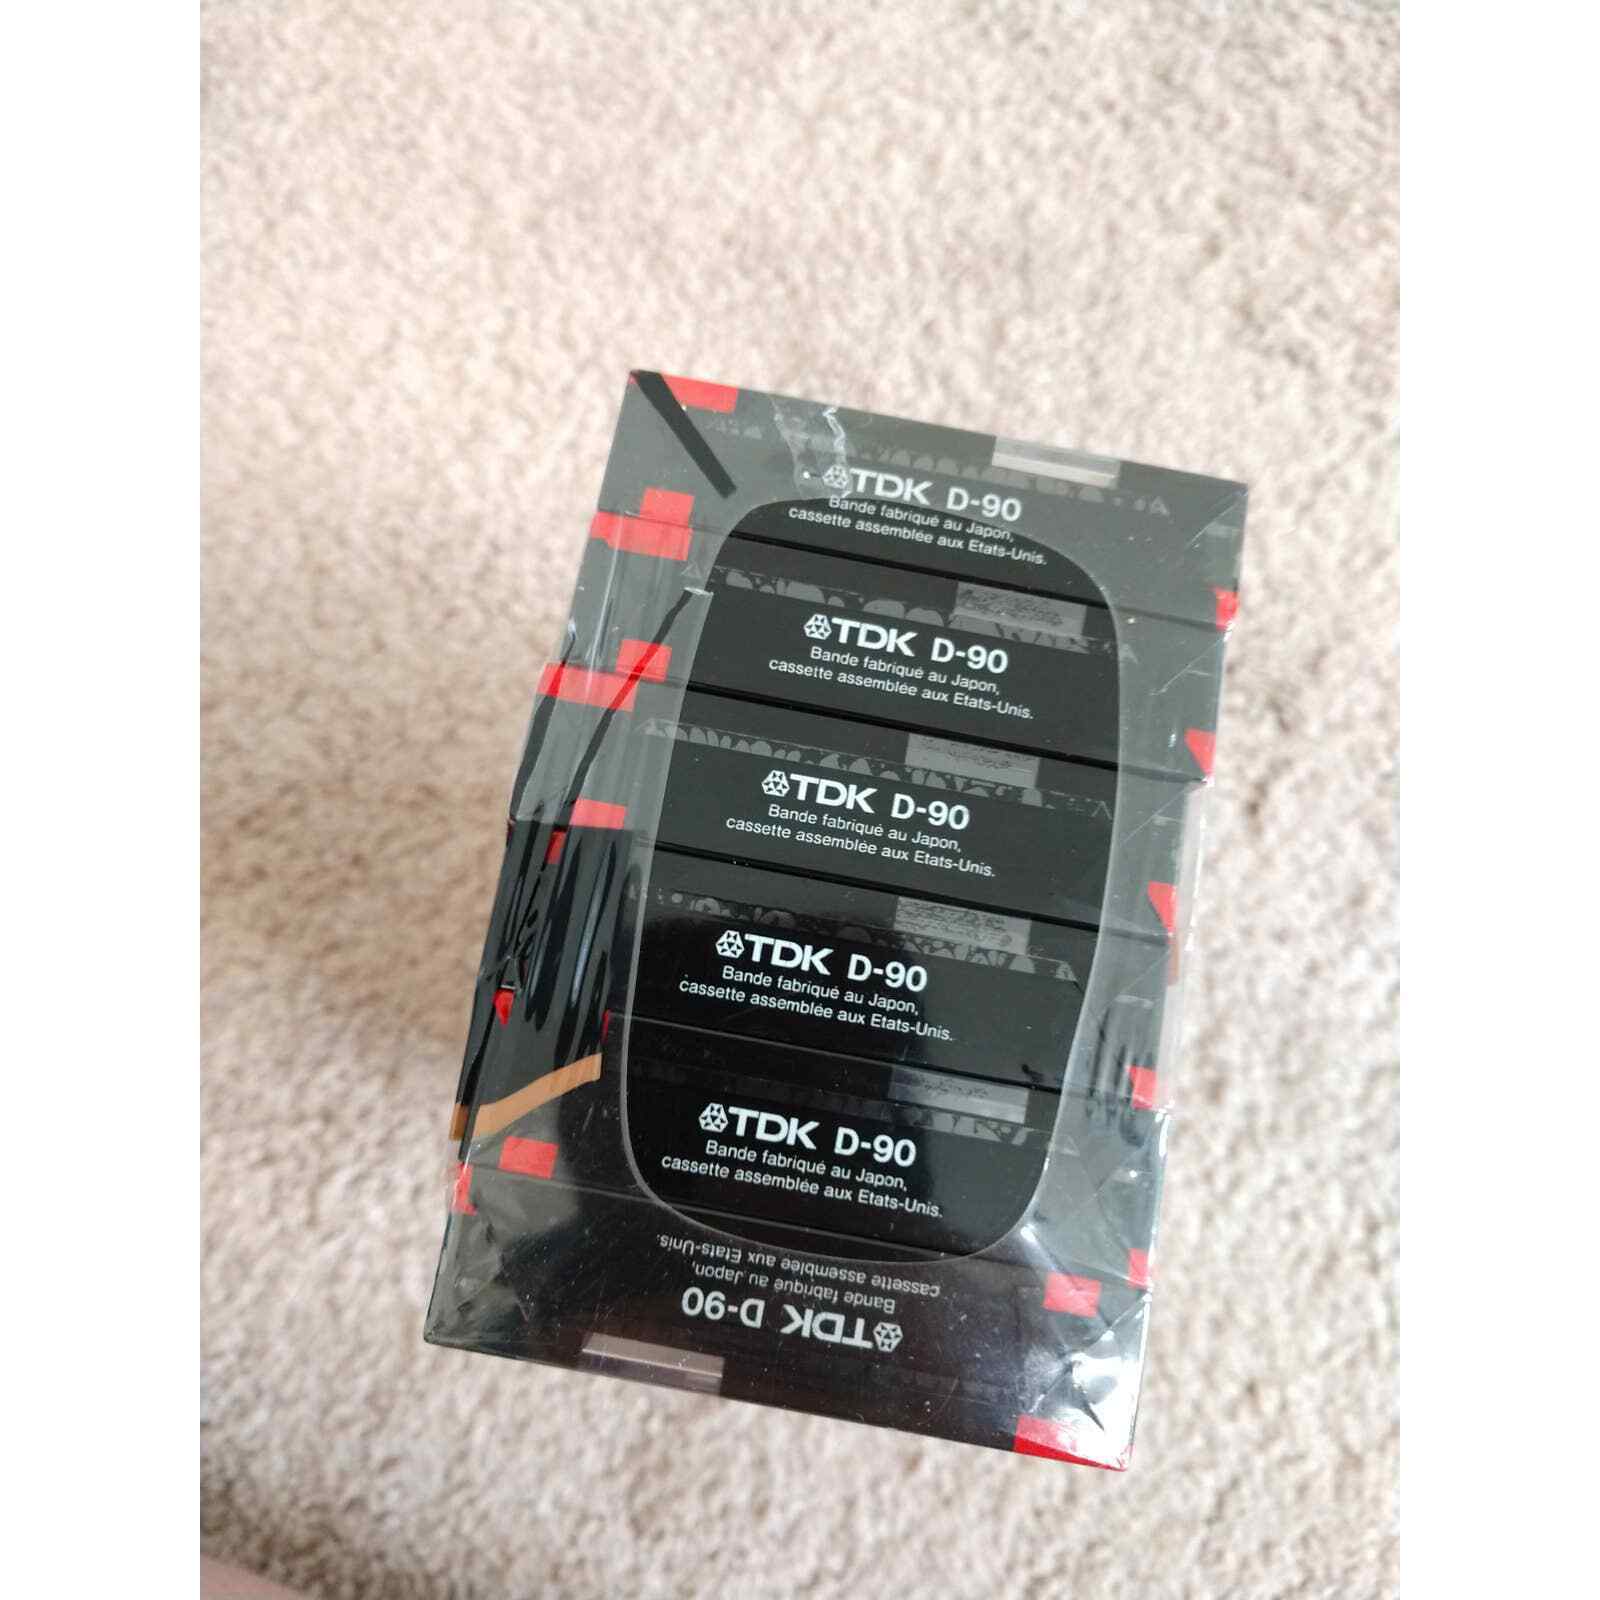 Tdk D90 12 Pack Of Tapes New In Package